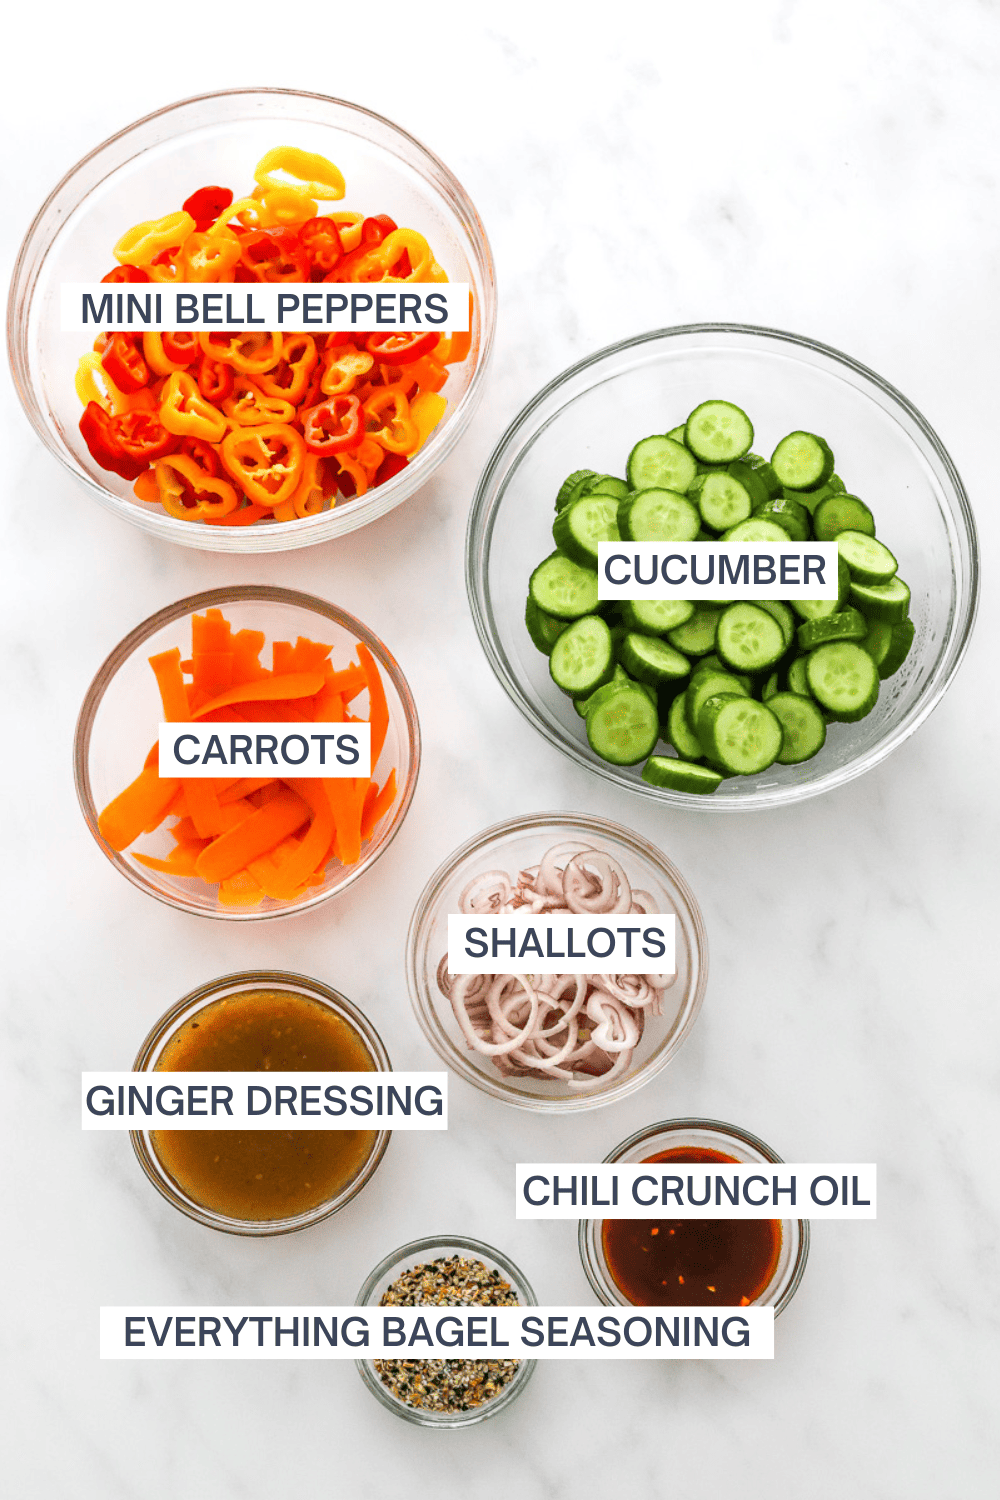 Cucumber pepper salad ingredients with labels for each ingredient.